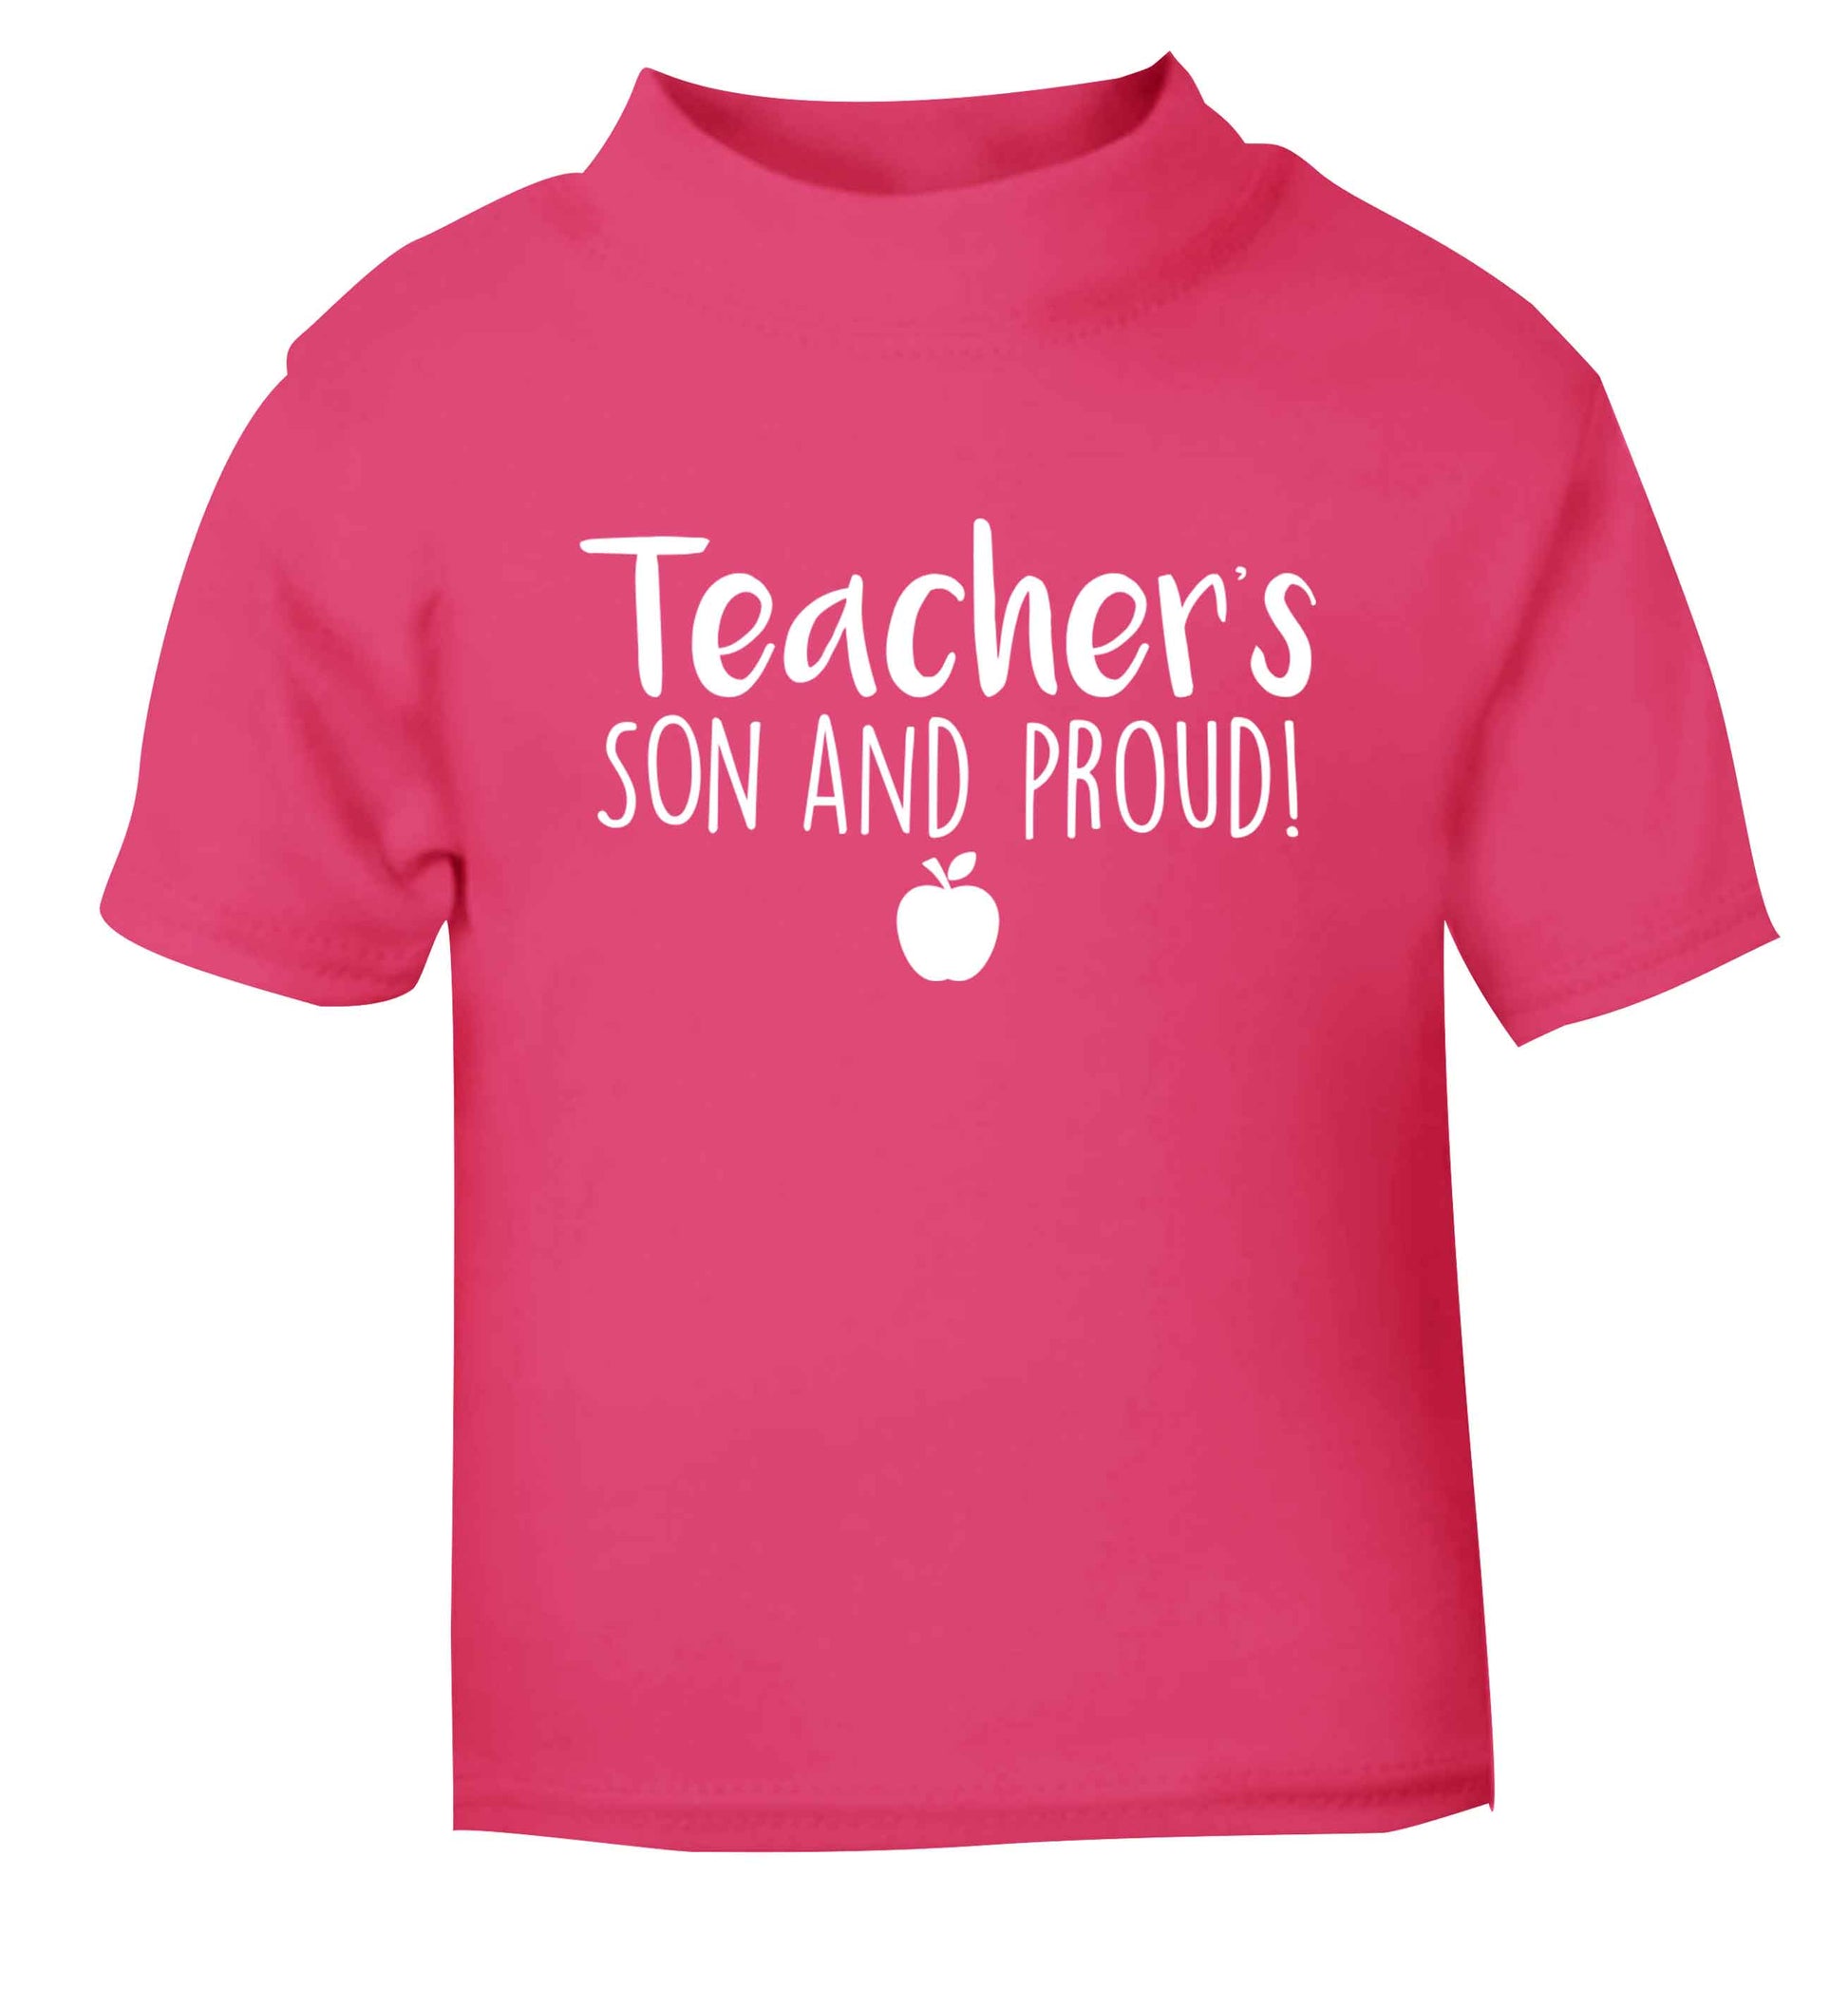 Teachers son and proud pink baby toddler Tshirt 2 Years